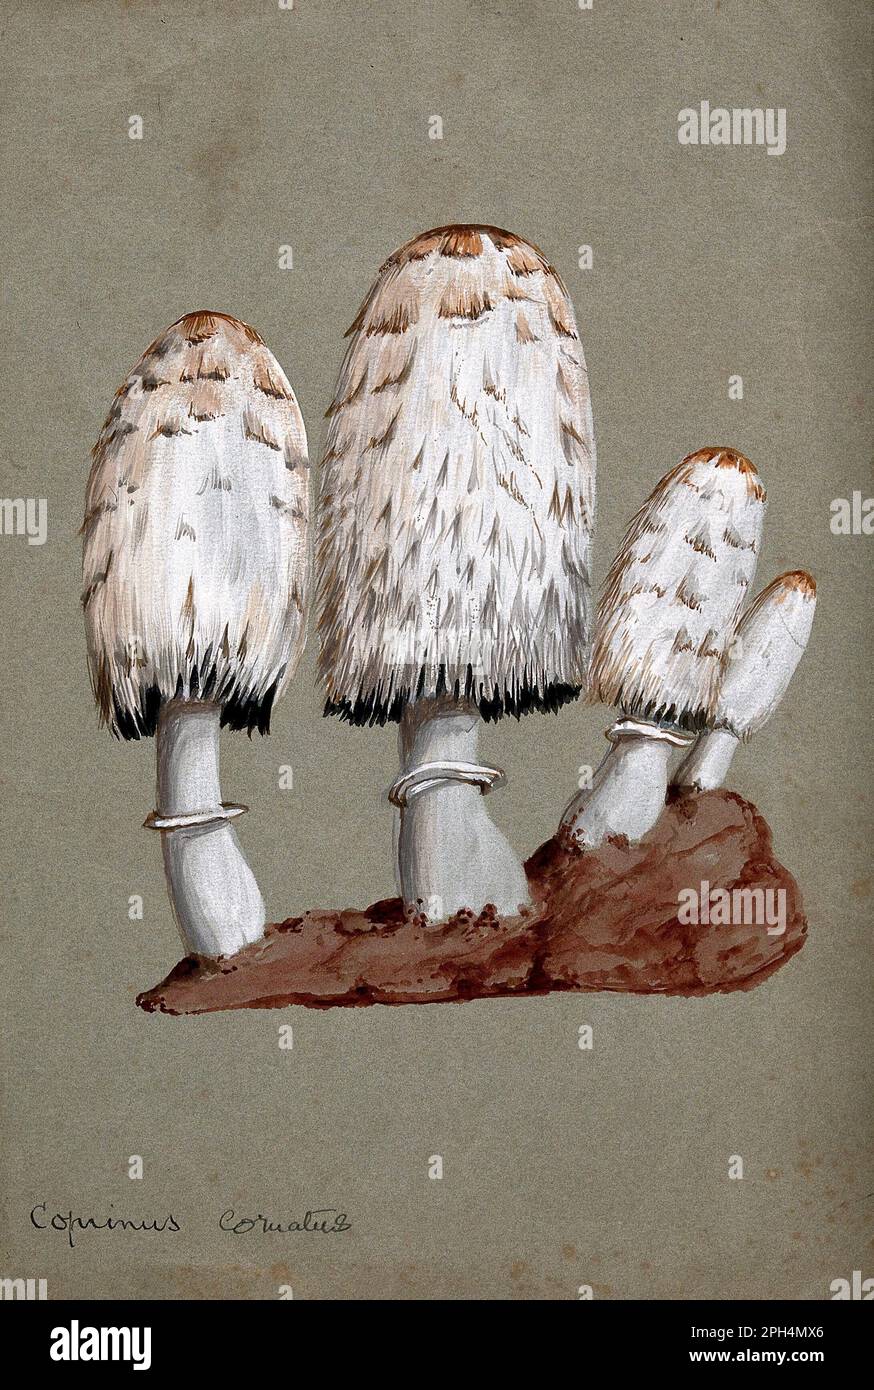 Coprinus Comatus, commonly known as the  Shaggy ink cap, Lawyer's wig, or Shaggy mane, vintage watercolour from 1800s Stock Photo